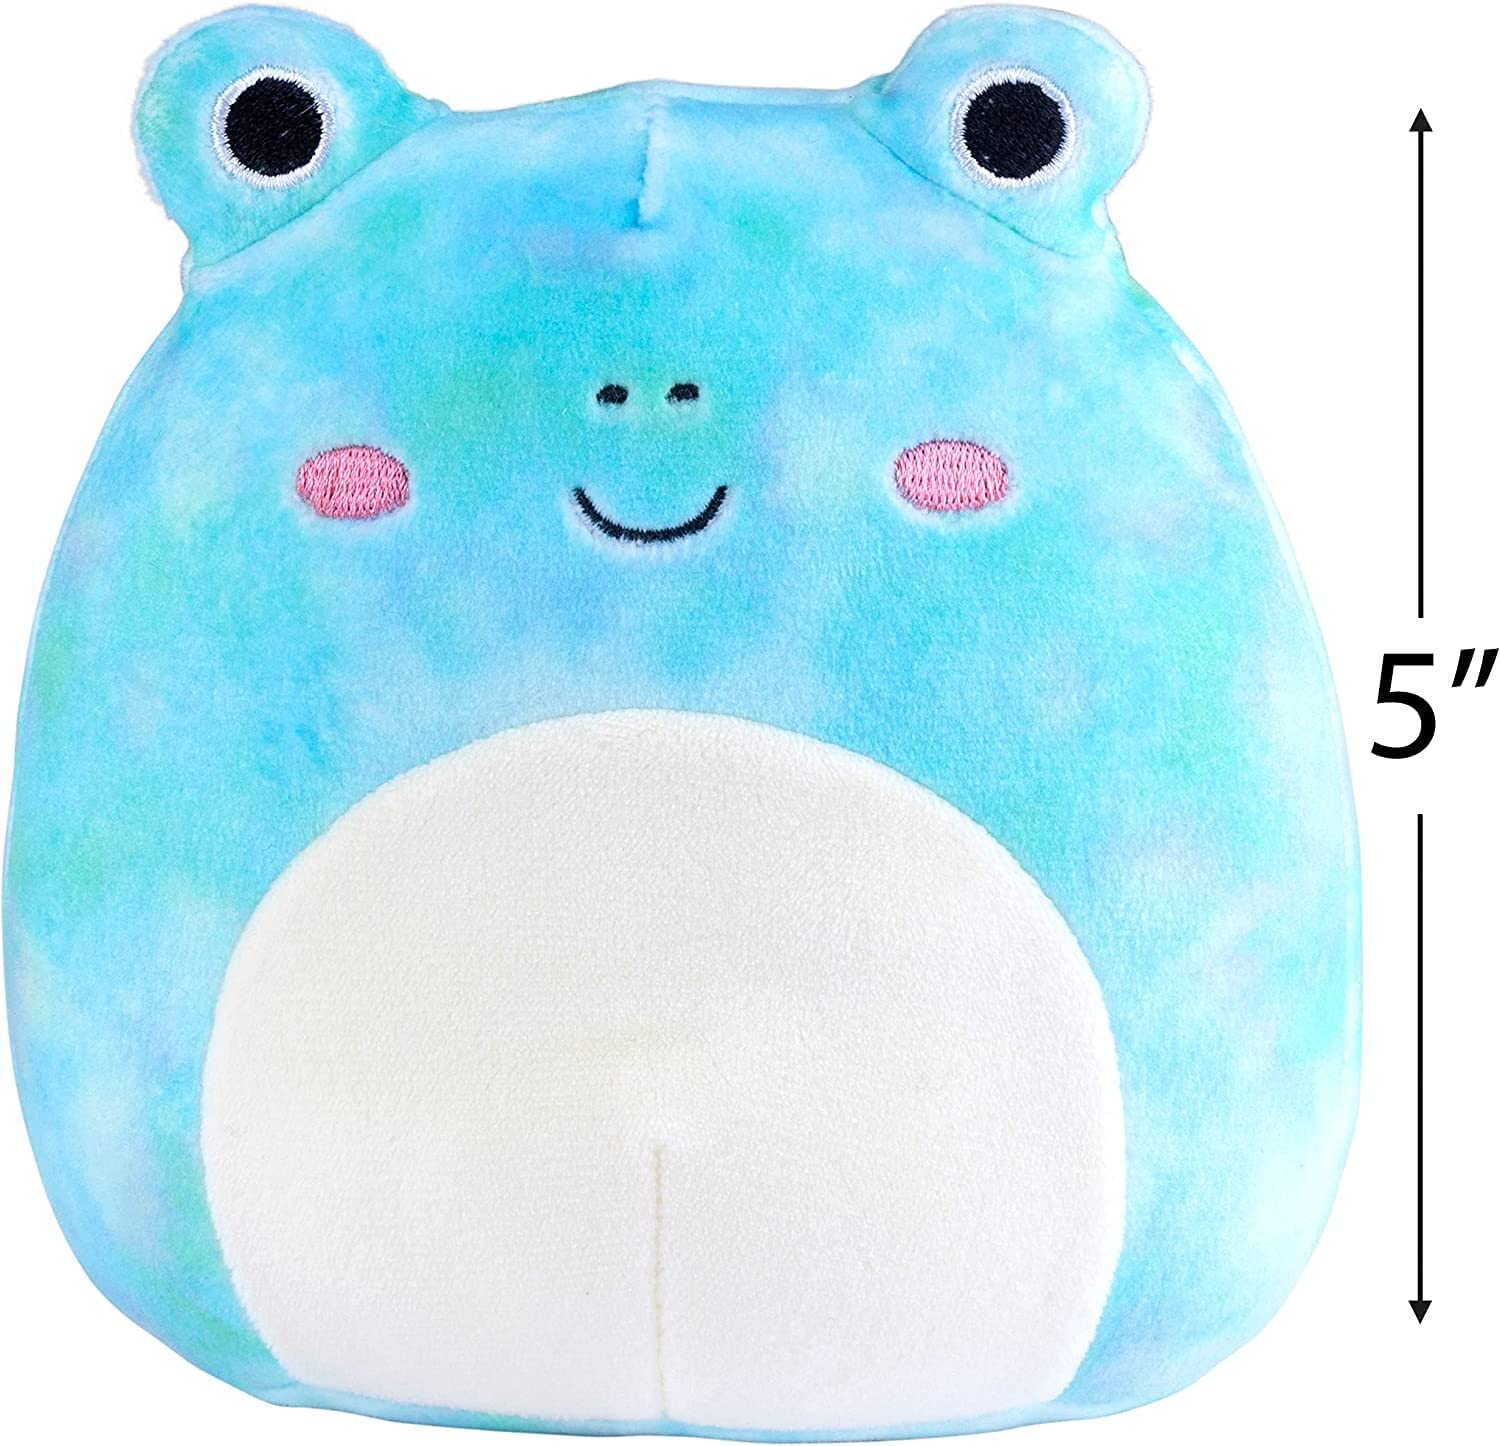 Squishmallow 5" Plush Mystery Box, 5-Pack - Assorted Set of Various Styles - Official Kellytoy - Cute and Soft Squishy Stuffed Animal Toy - image 4 of 5